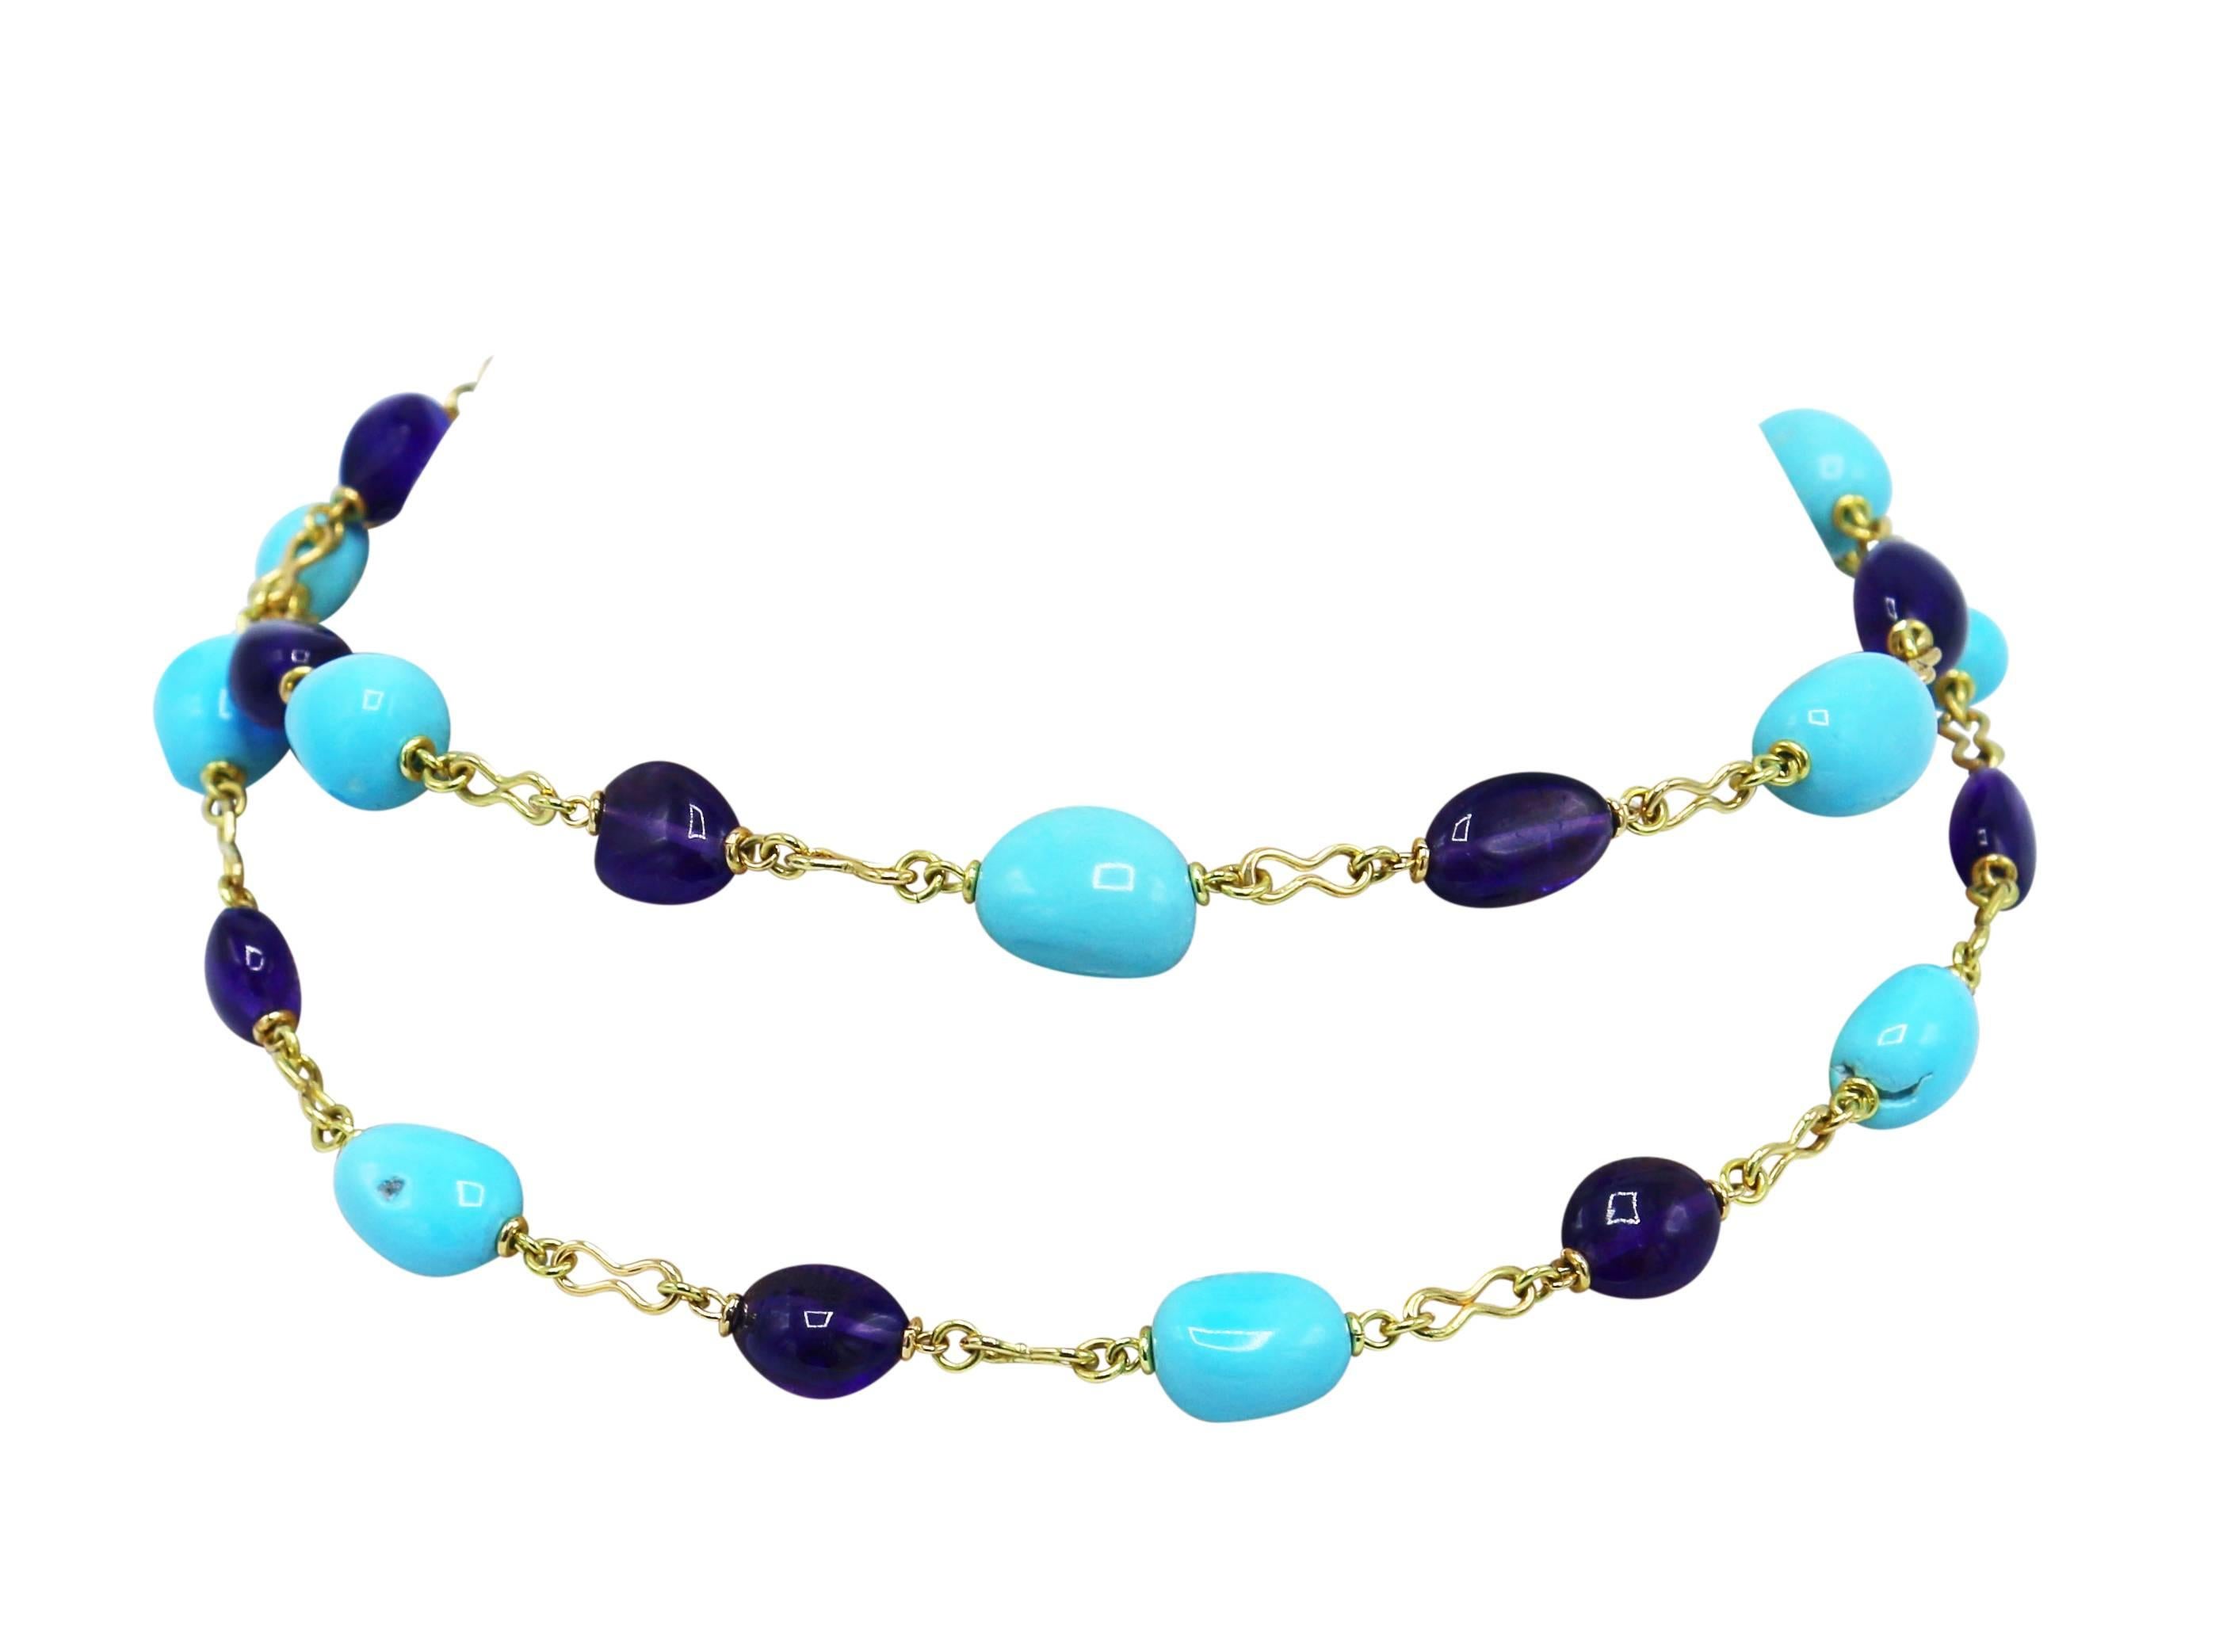 Stylish handmade 18 karat yellow gold, amethyst and turquoise bead necklace, a single strand composed of alternating amethyst and turquoise beads spaced by handmade gold links, completed by a similar shaped gold bead clasp studded with round